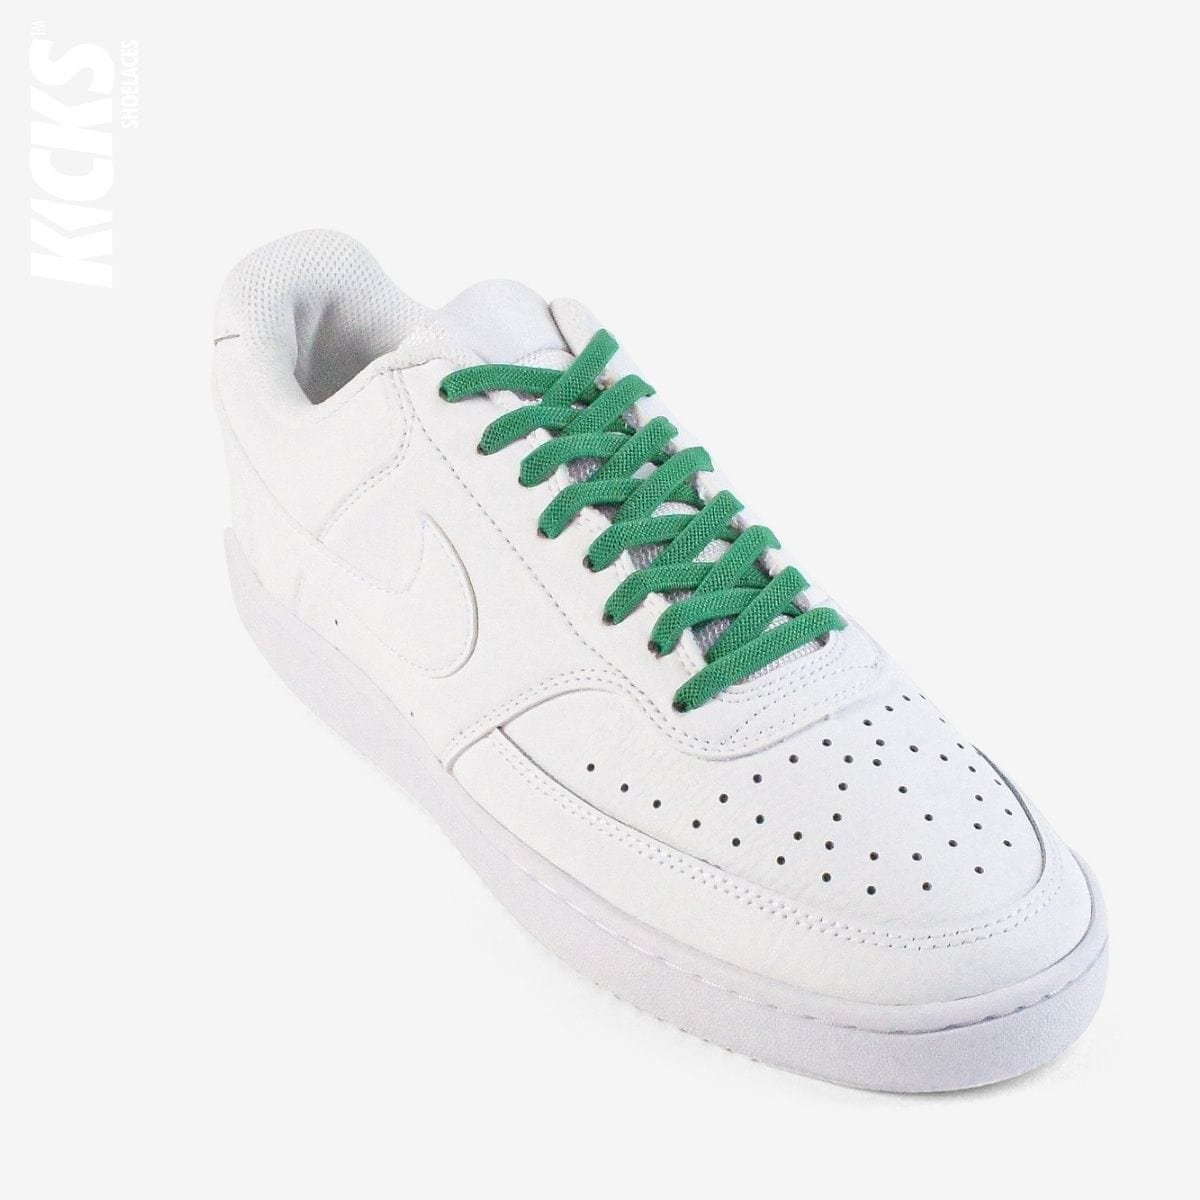 no-tie-shoelaces-with-green-laces-on-nike-white-sneakers-by-kicks-shoelaces